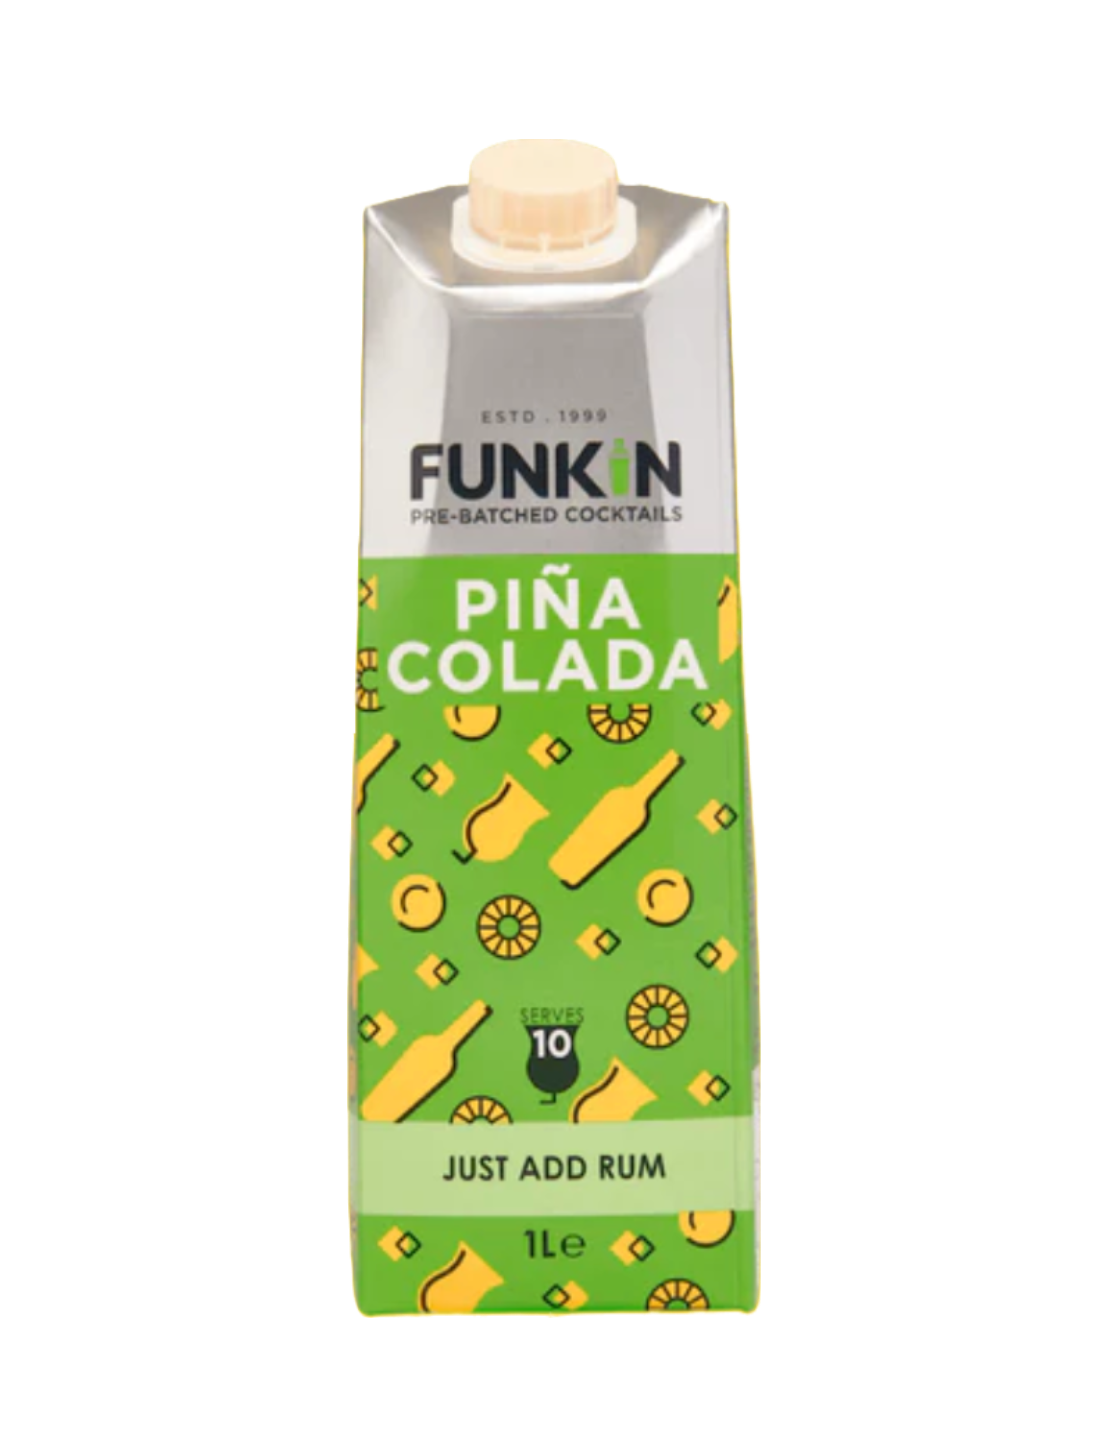 Bottle of Funkin Cocktails Pina Colada in green packaging in front of a white background